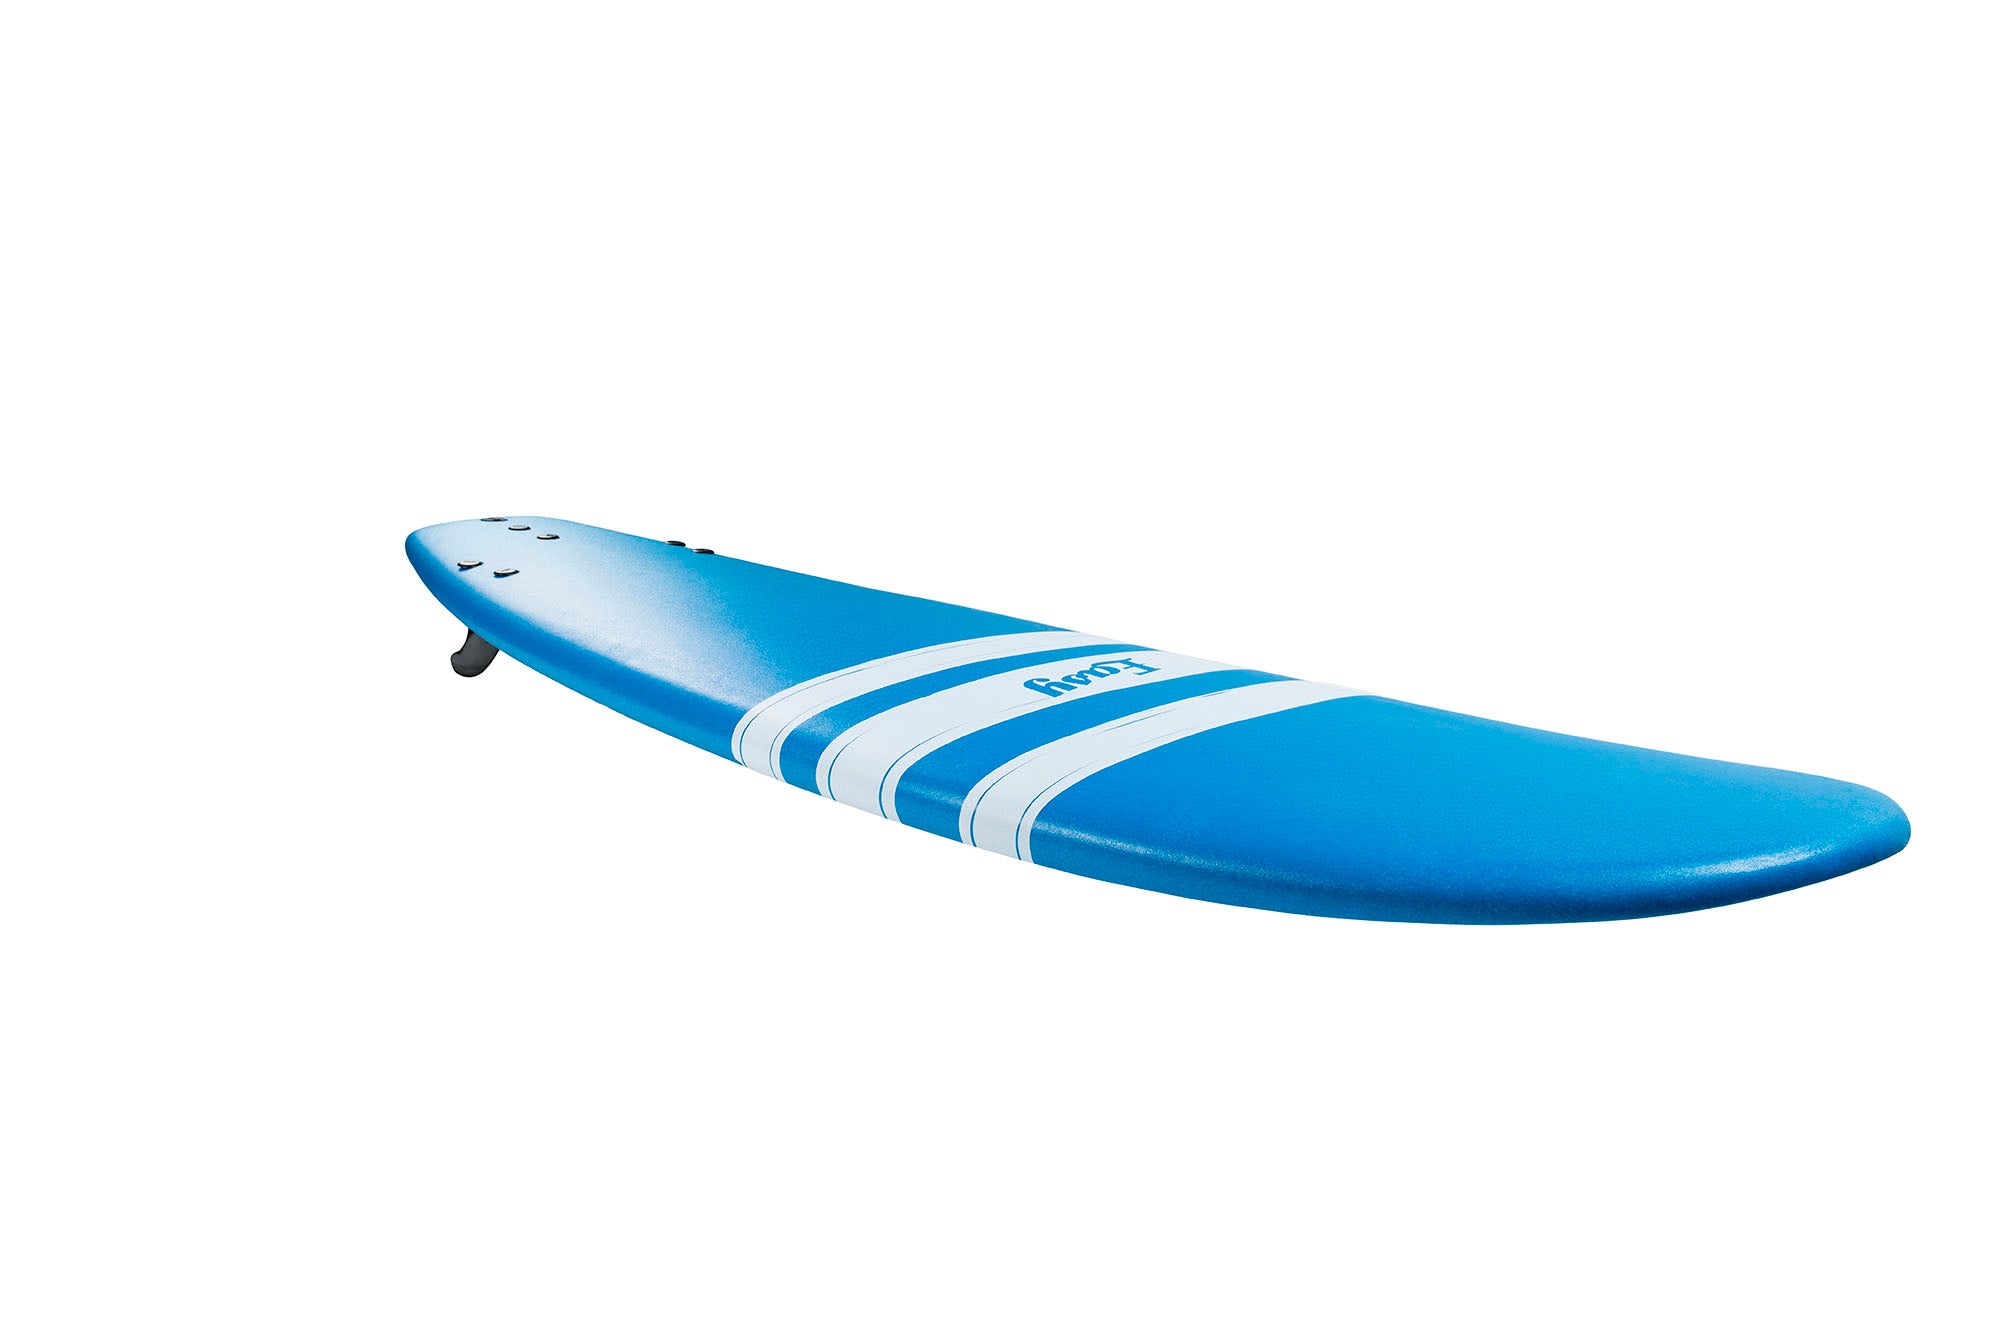 Easy 7ft 6 Soft Top Surfboard - Boards360